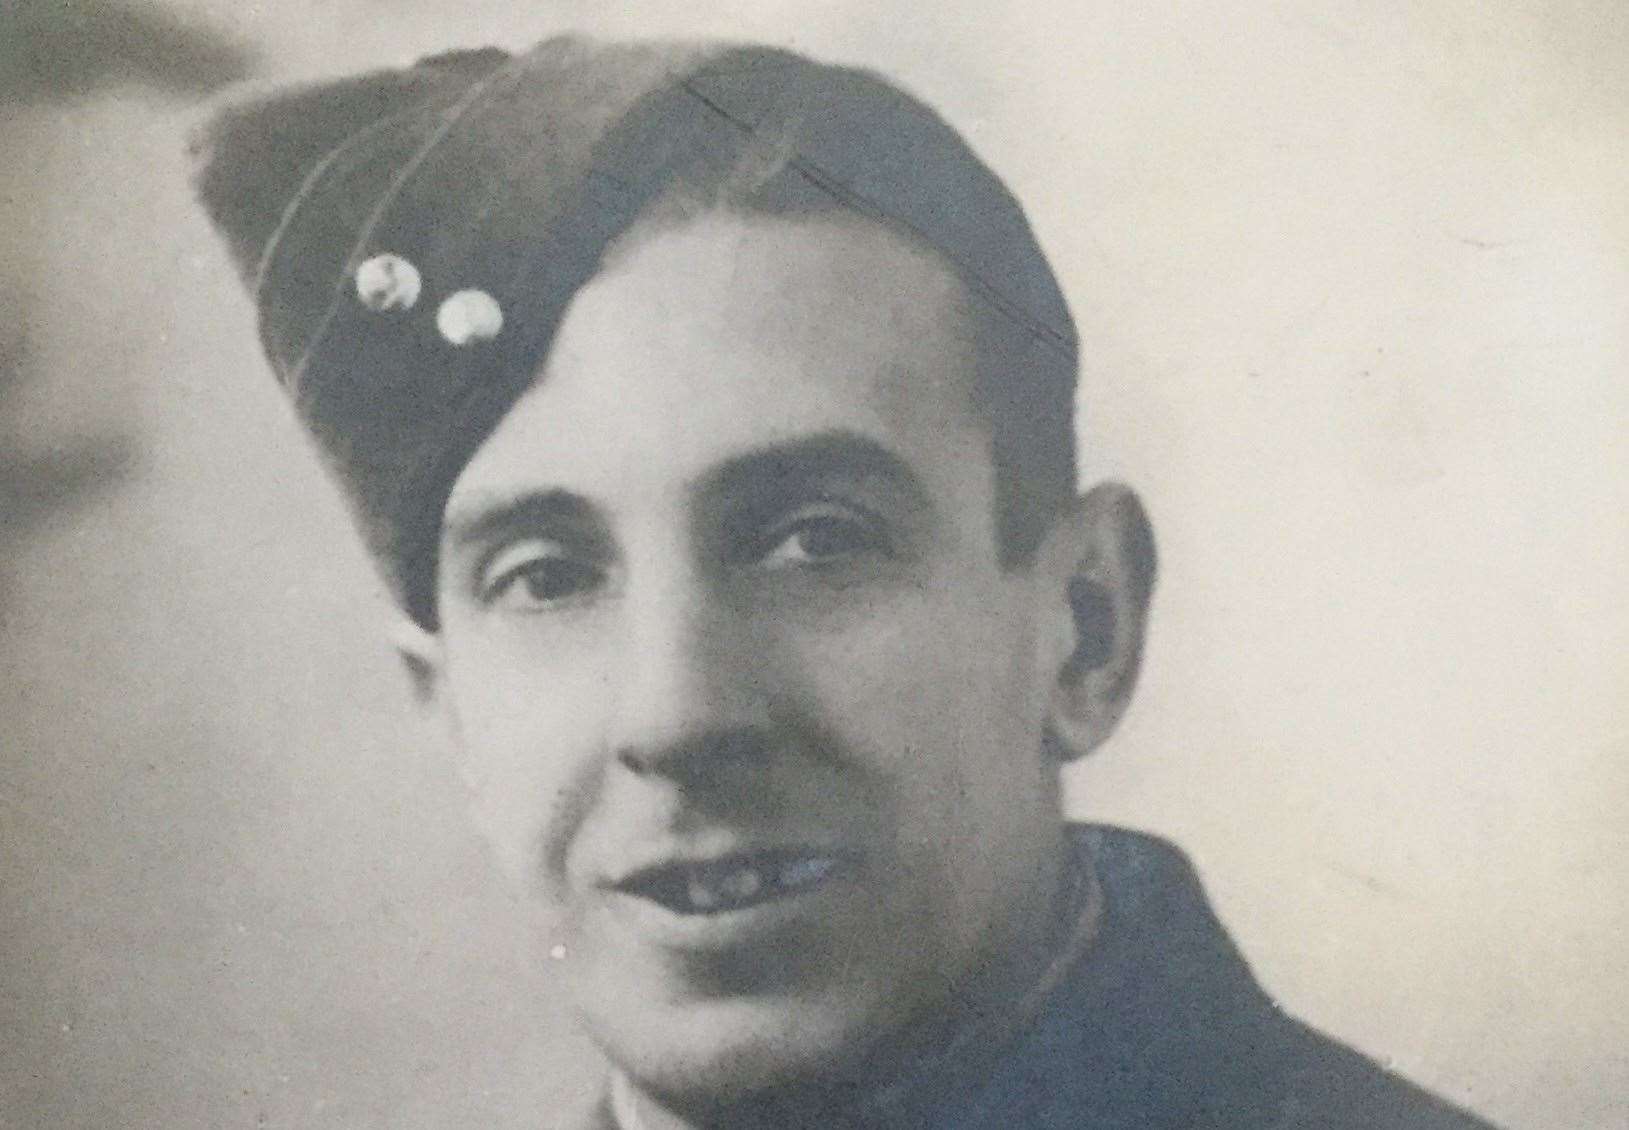 Sgt Leonard Shrubsall, who was 30 when the Short Stirling Bomber was lost